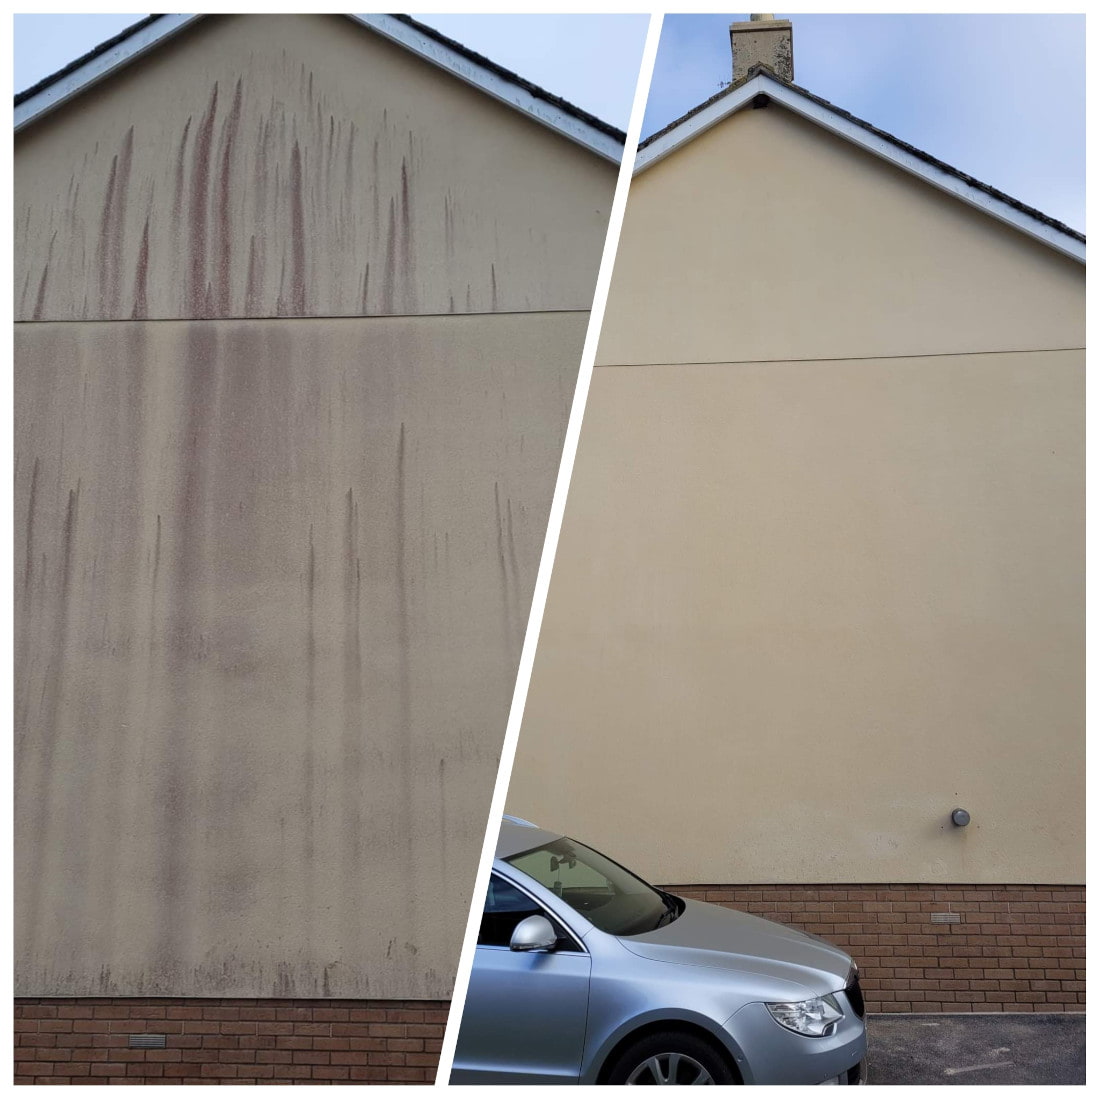 Soft Wash Exterior Cleaning  Call For A Free No Obligation Quote